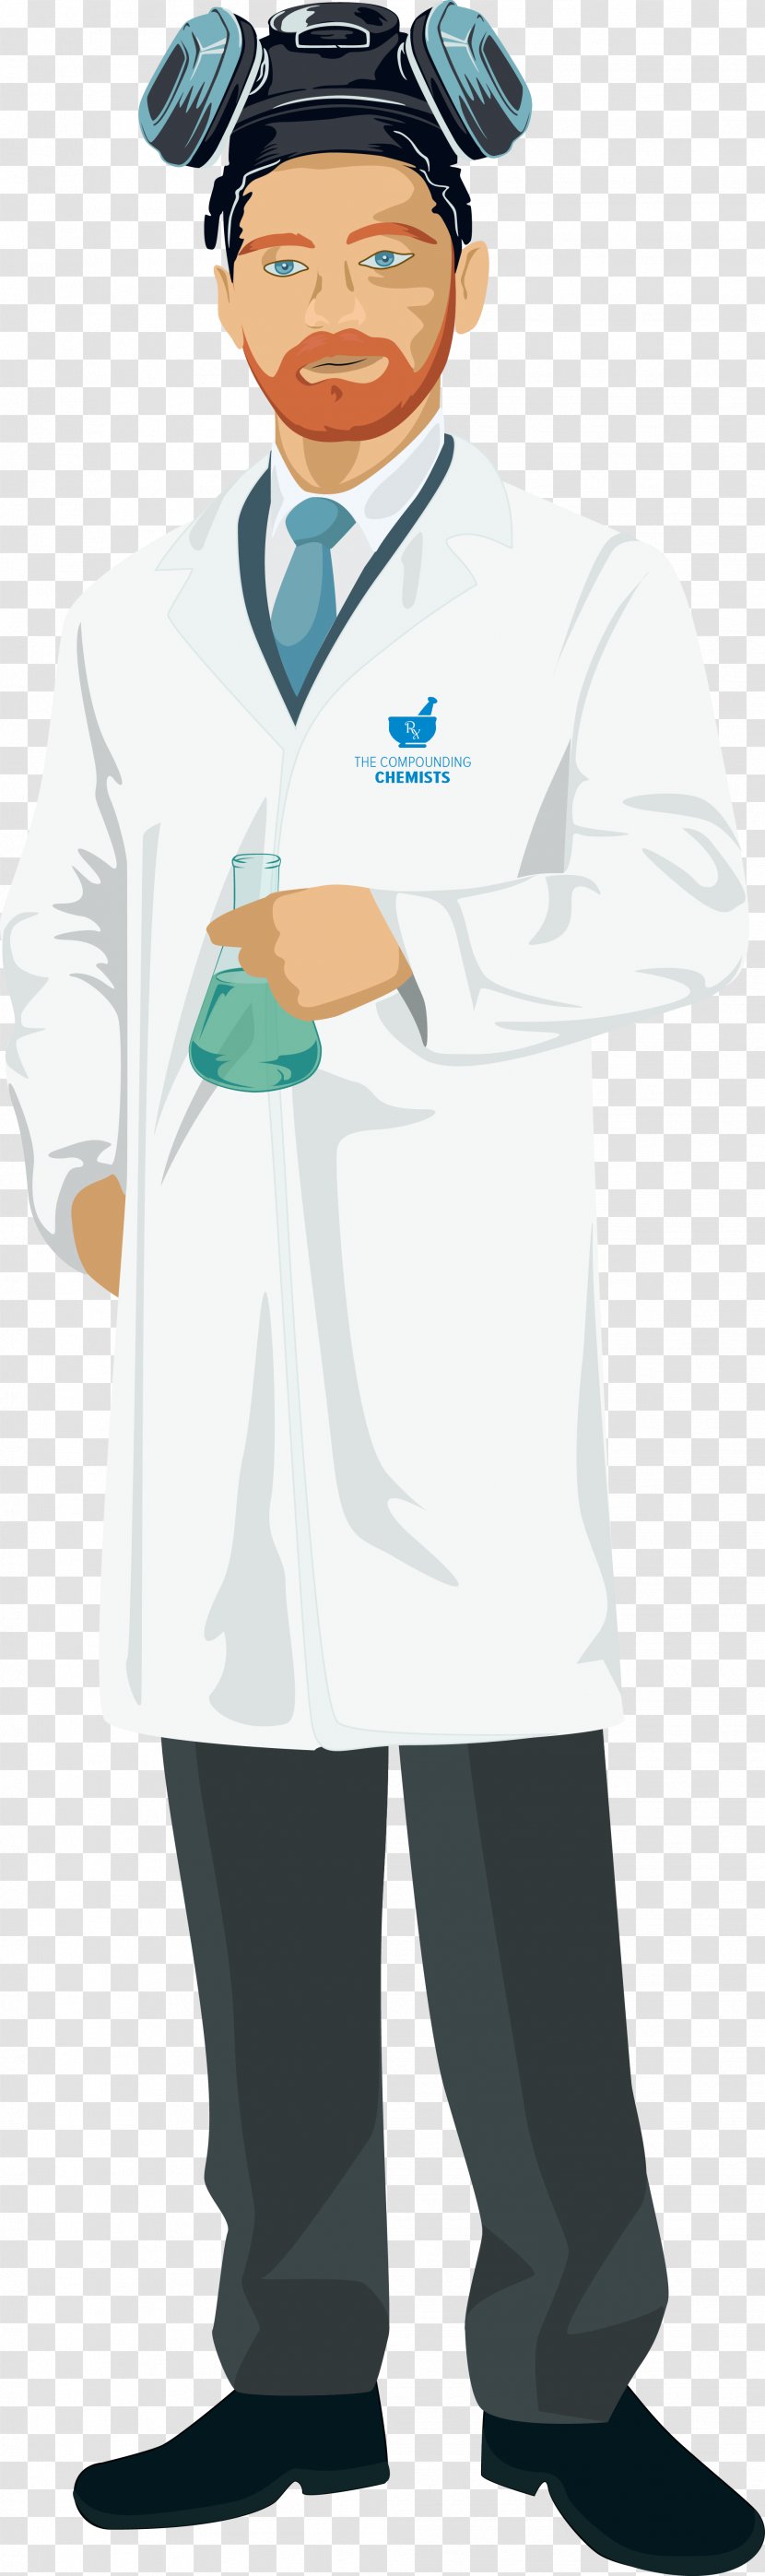 Pharmacy Medicine Physician Health Profession - Pharmacist Transparent PNG